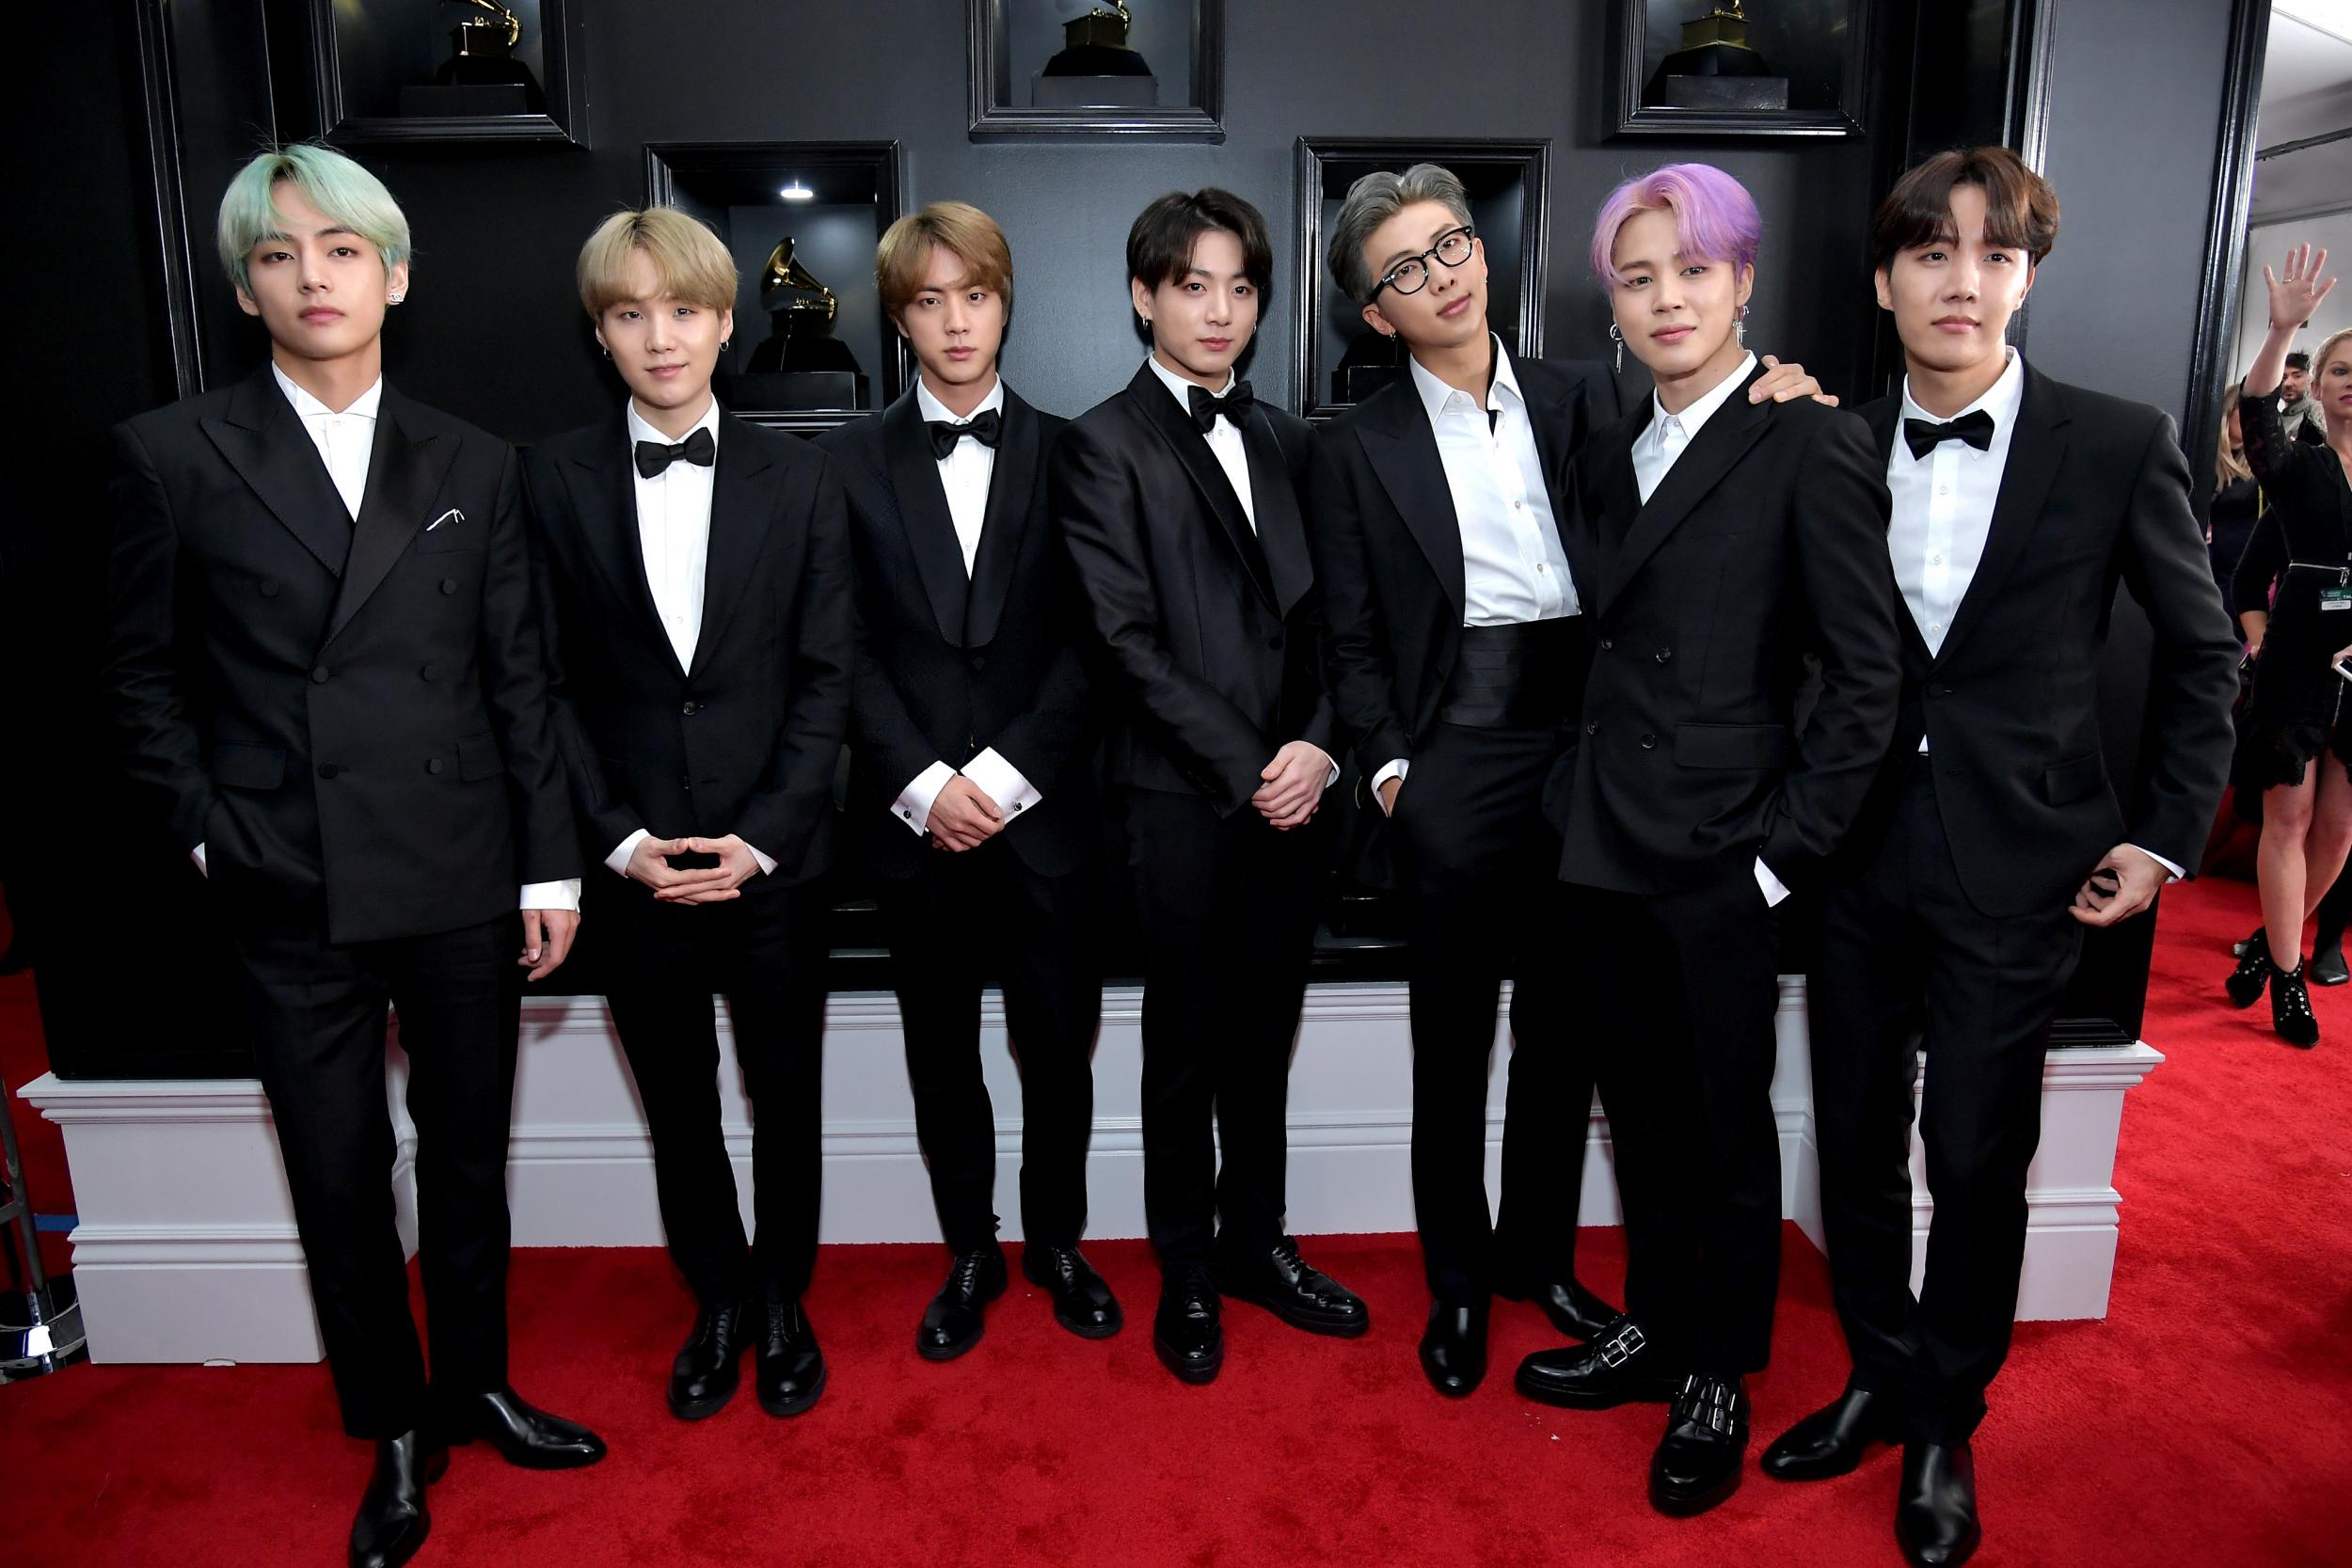 BTS Wembley tickets: How to see the K Pop stars perform live in London | The Independent2500 x 1667